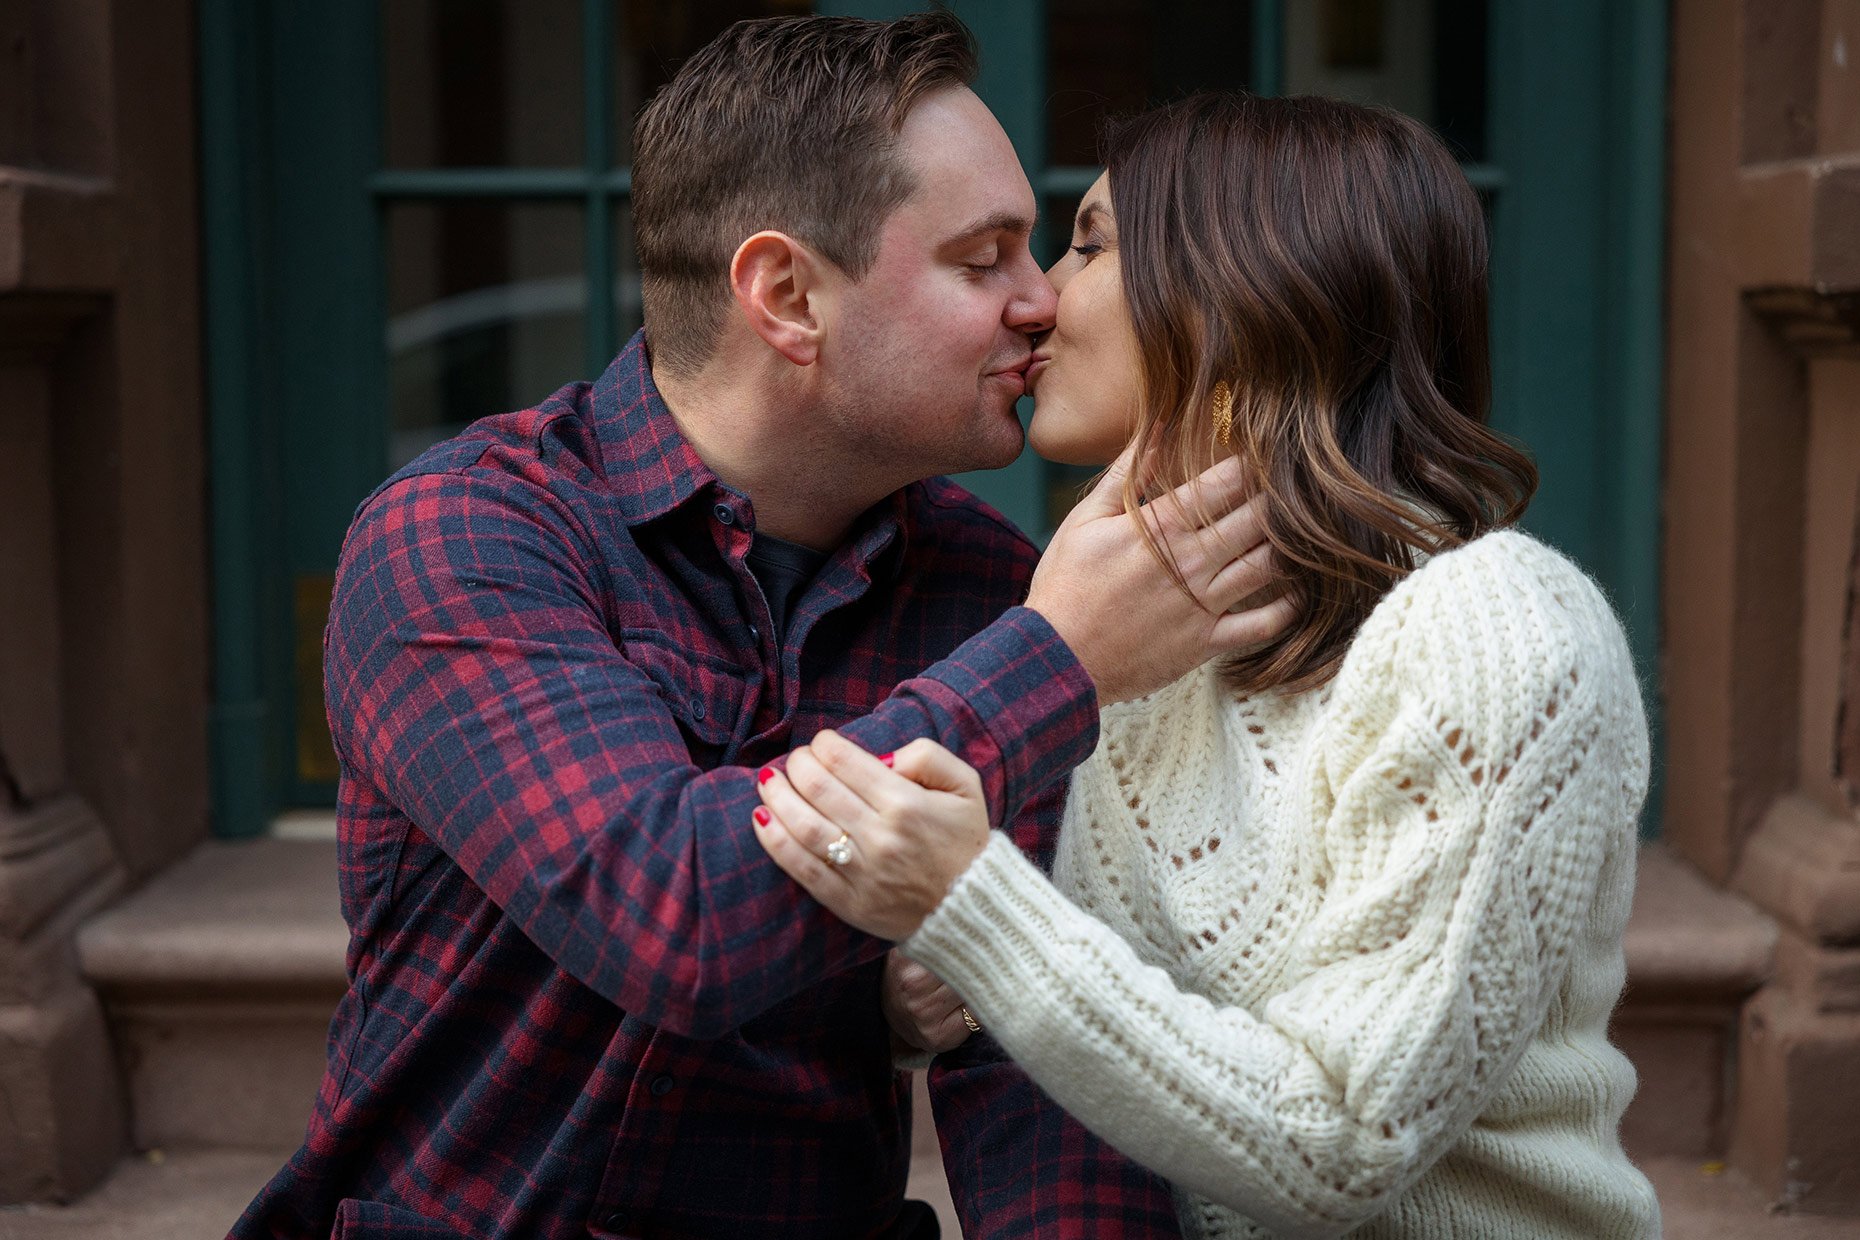 NYC Couple kissing at Engagement Session